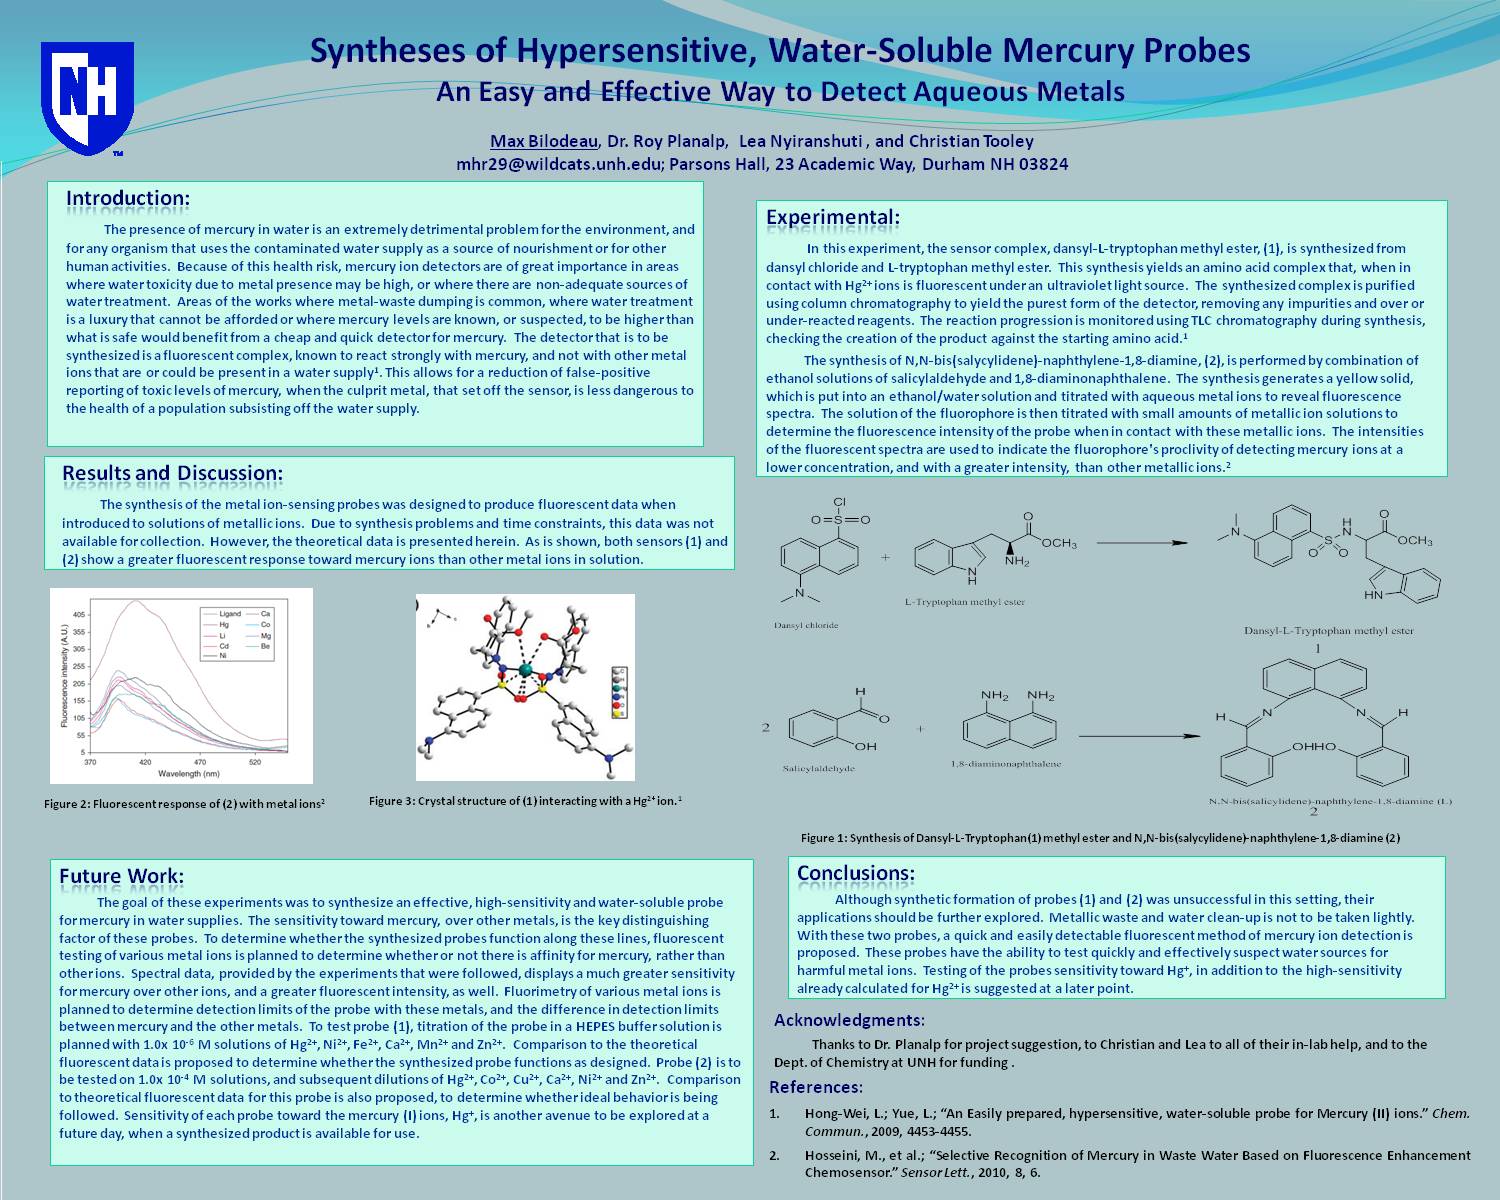 Syntheses Of Hypersensitive, Water-Soluble Mercury Probes by mhr29